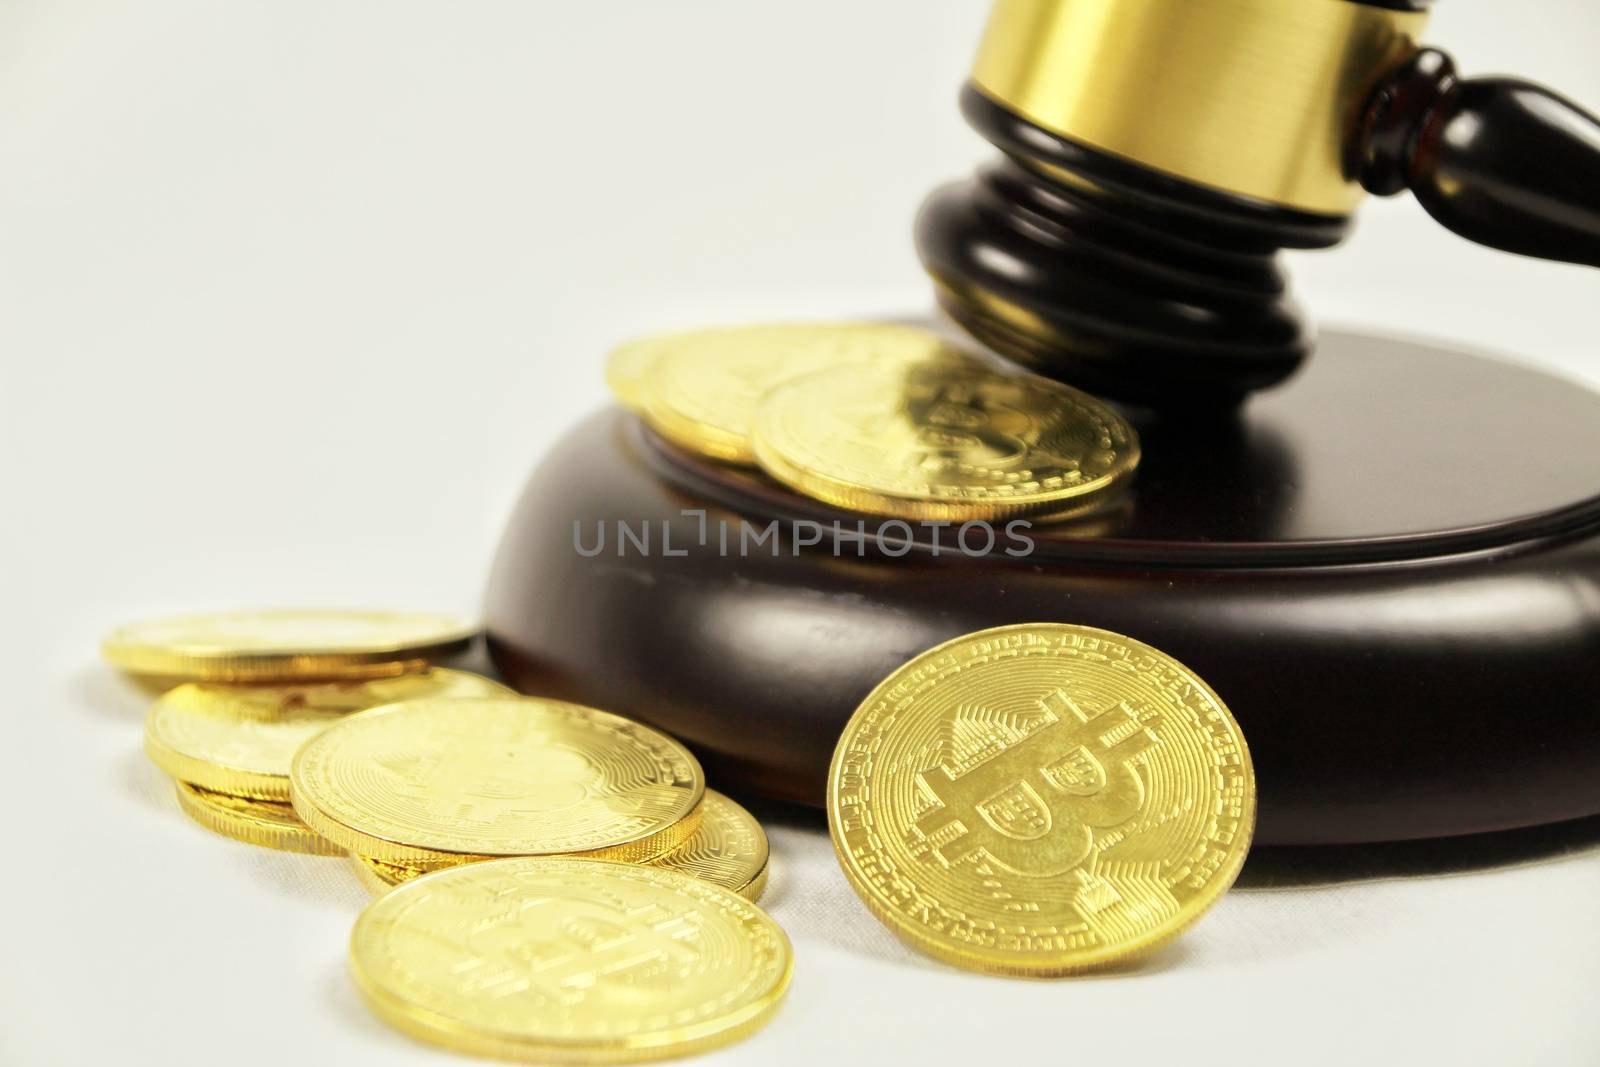 Golden bitcoins and judge gavel on white background